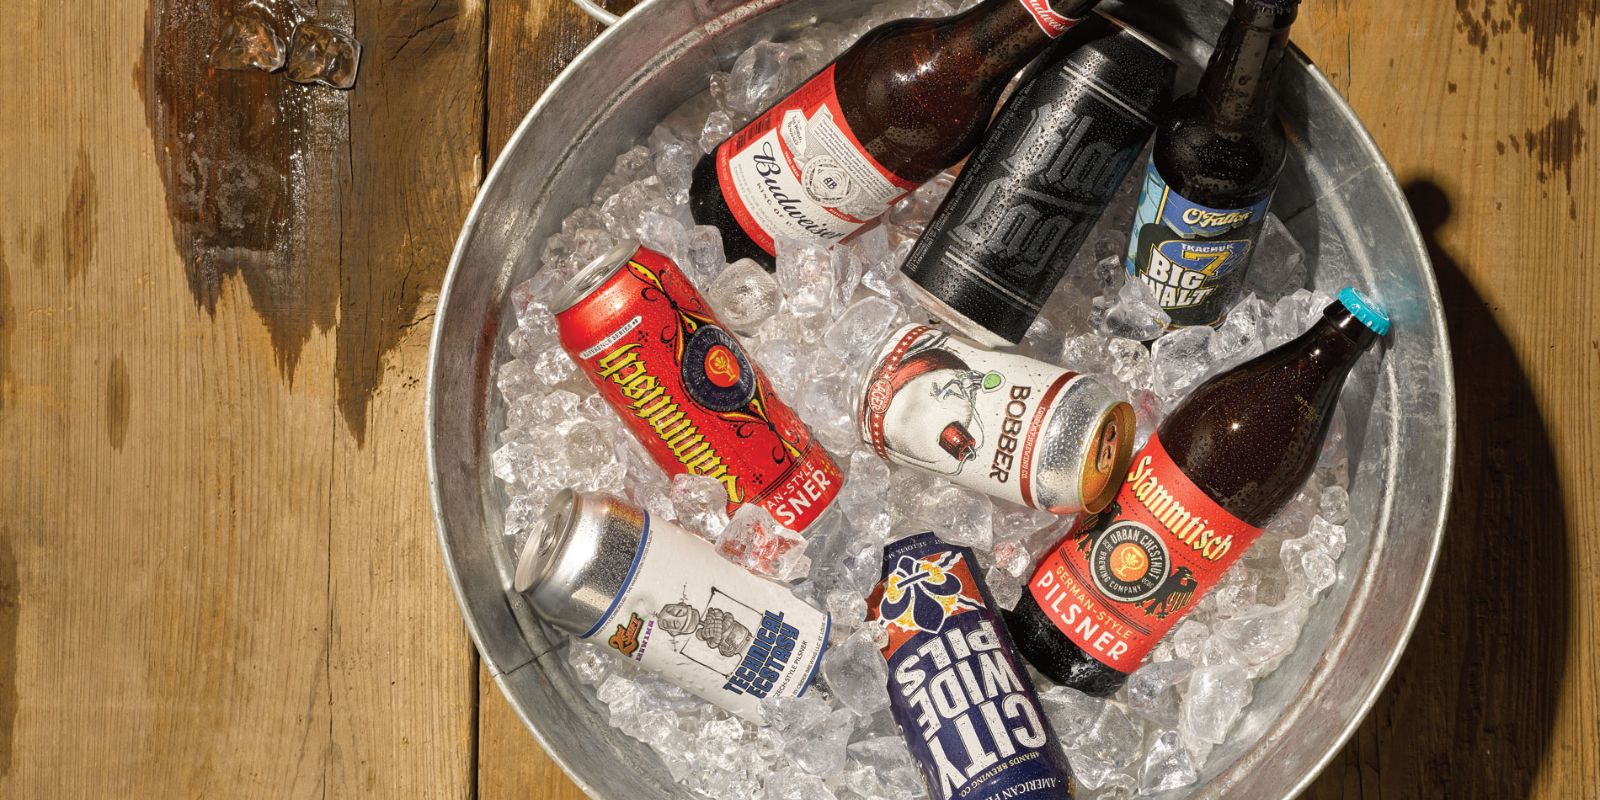 When it comes to beer, wine and spirits, St. Louis knows no limits.